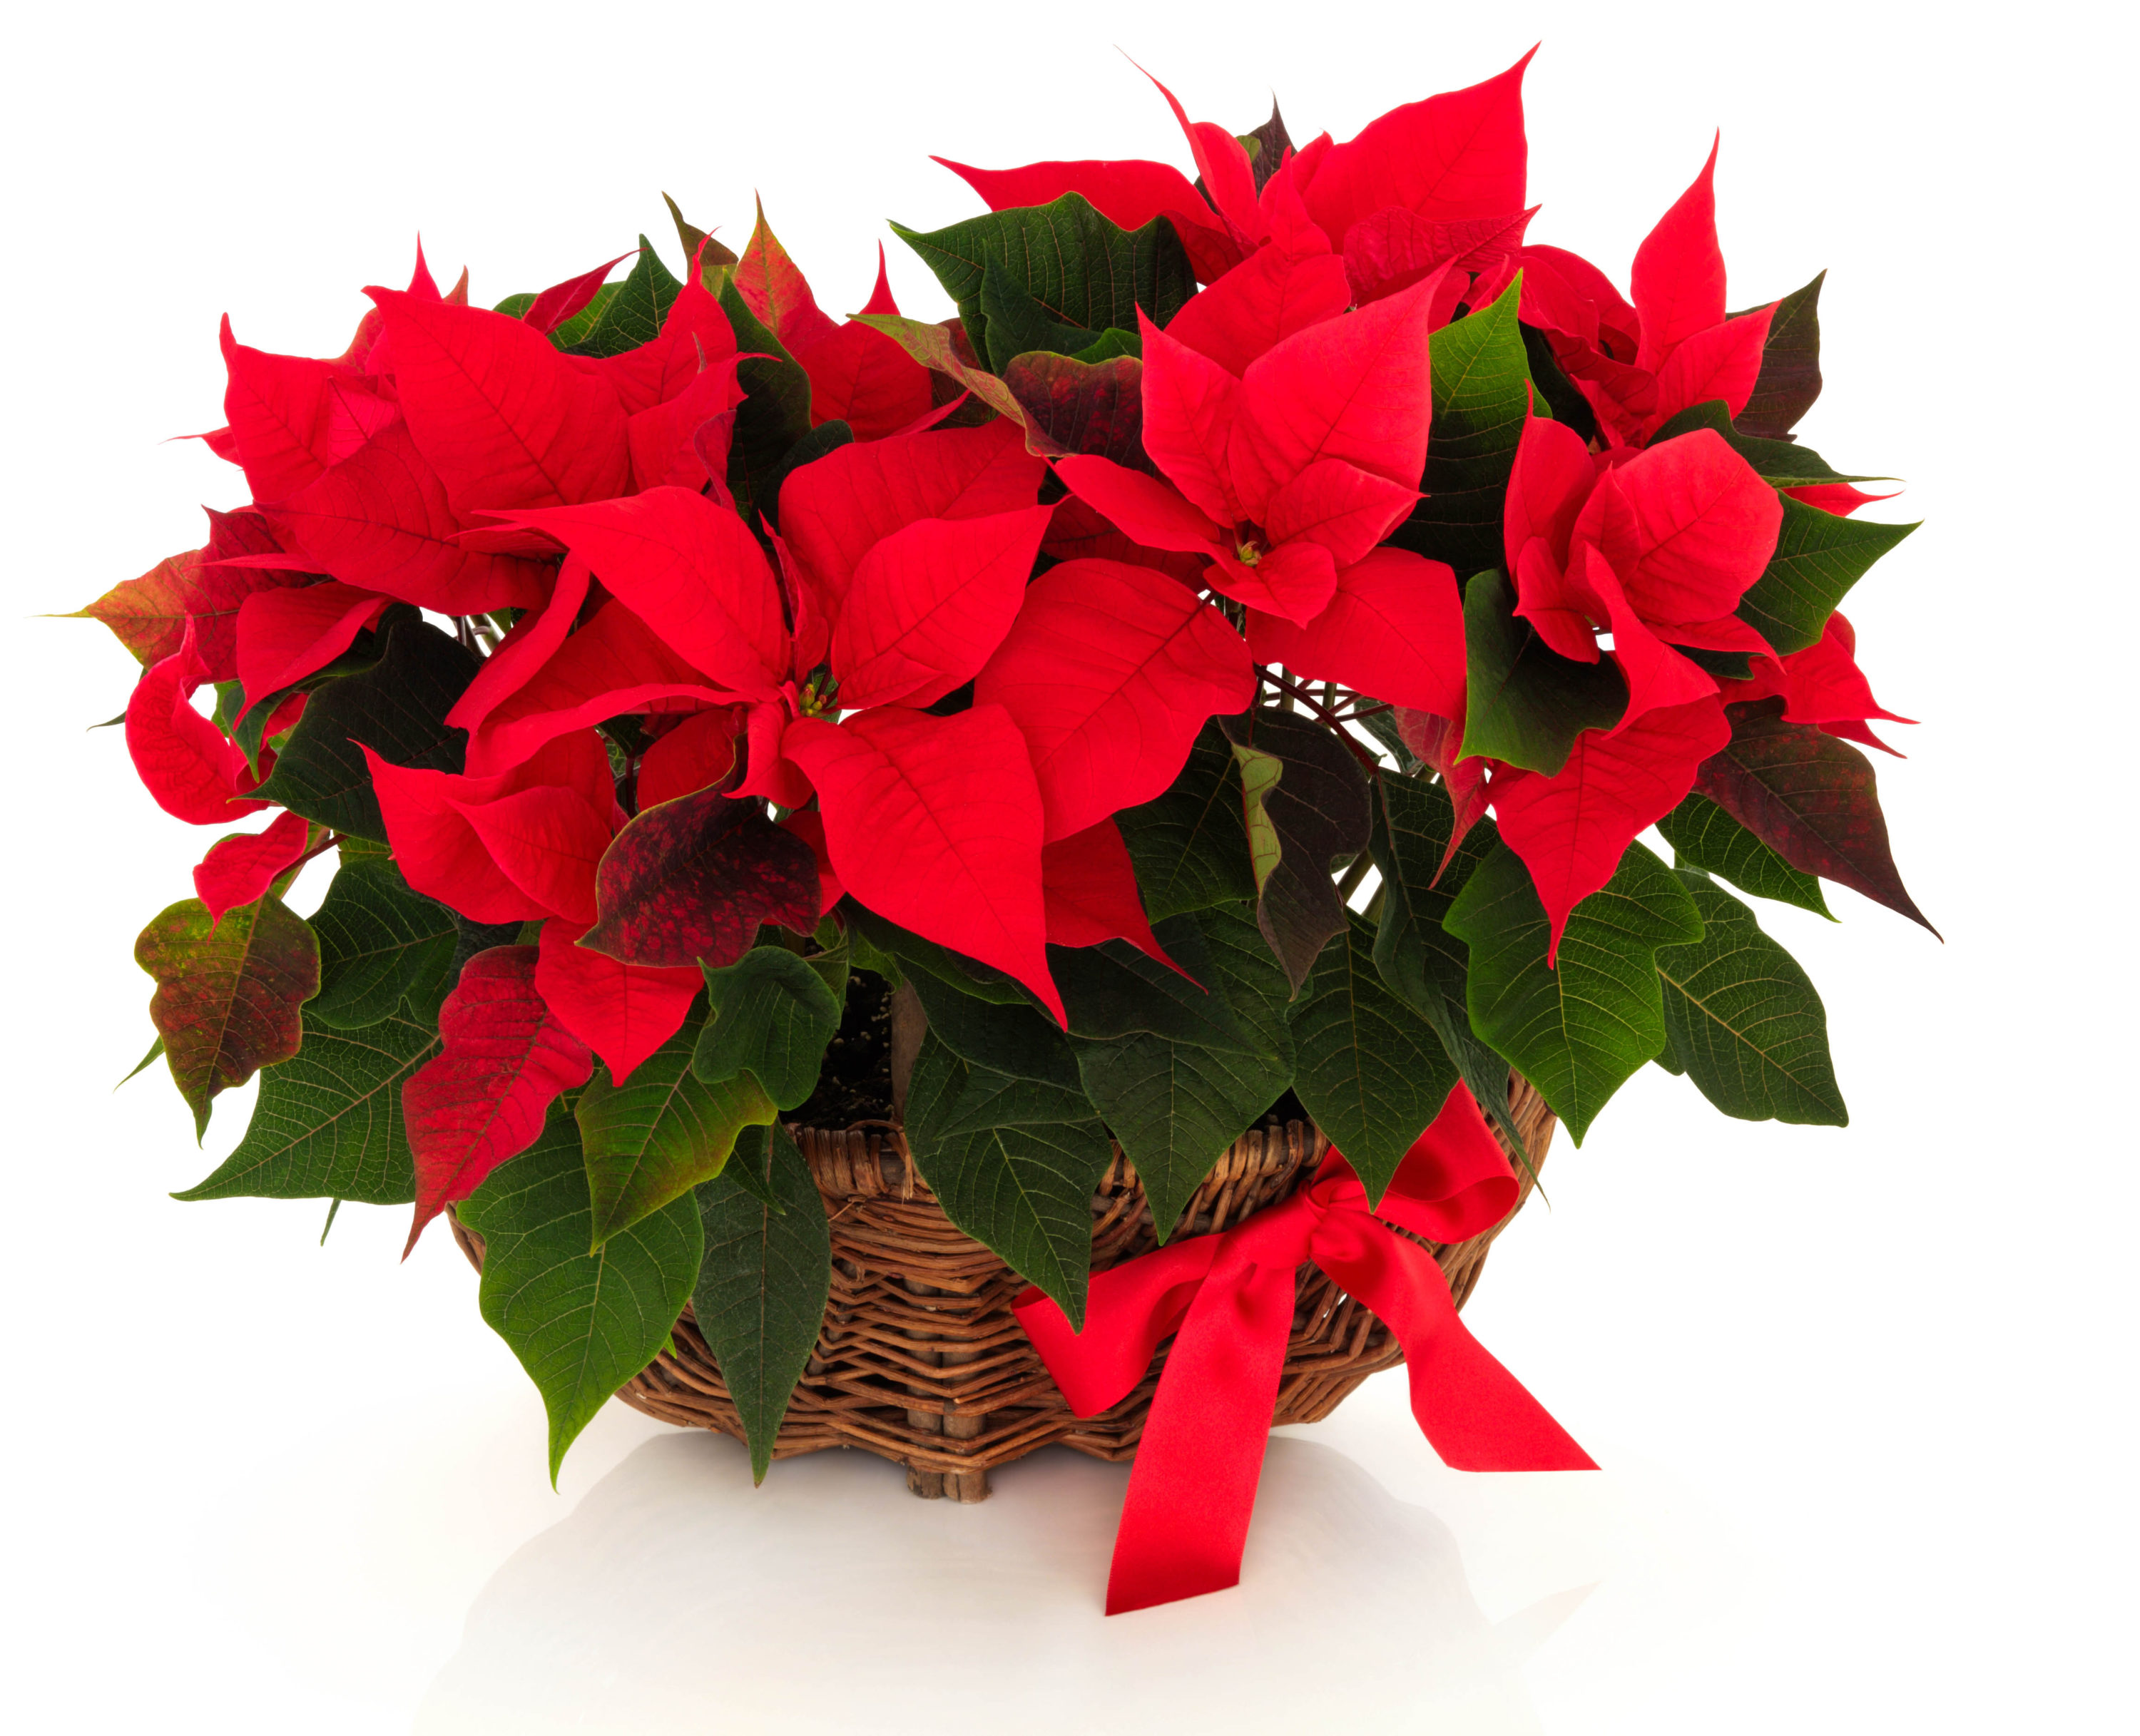 Are poinsettias poisonous? As much as it suits holiday decor and seems tailor-made for that special time of year between Thanksgiving and the first of January, the poinsettia has a reputation that few plants would want. #poinsettias